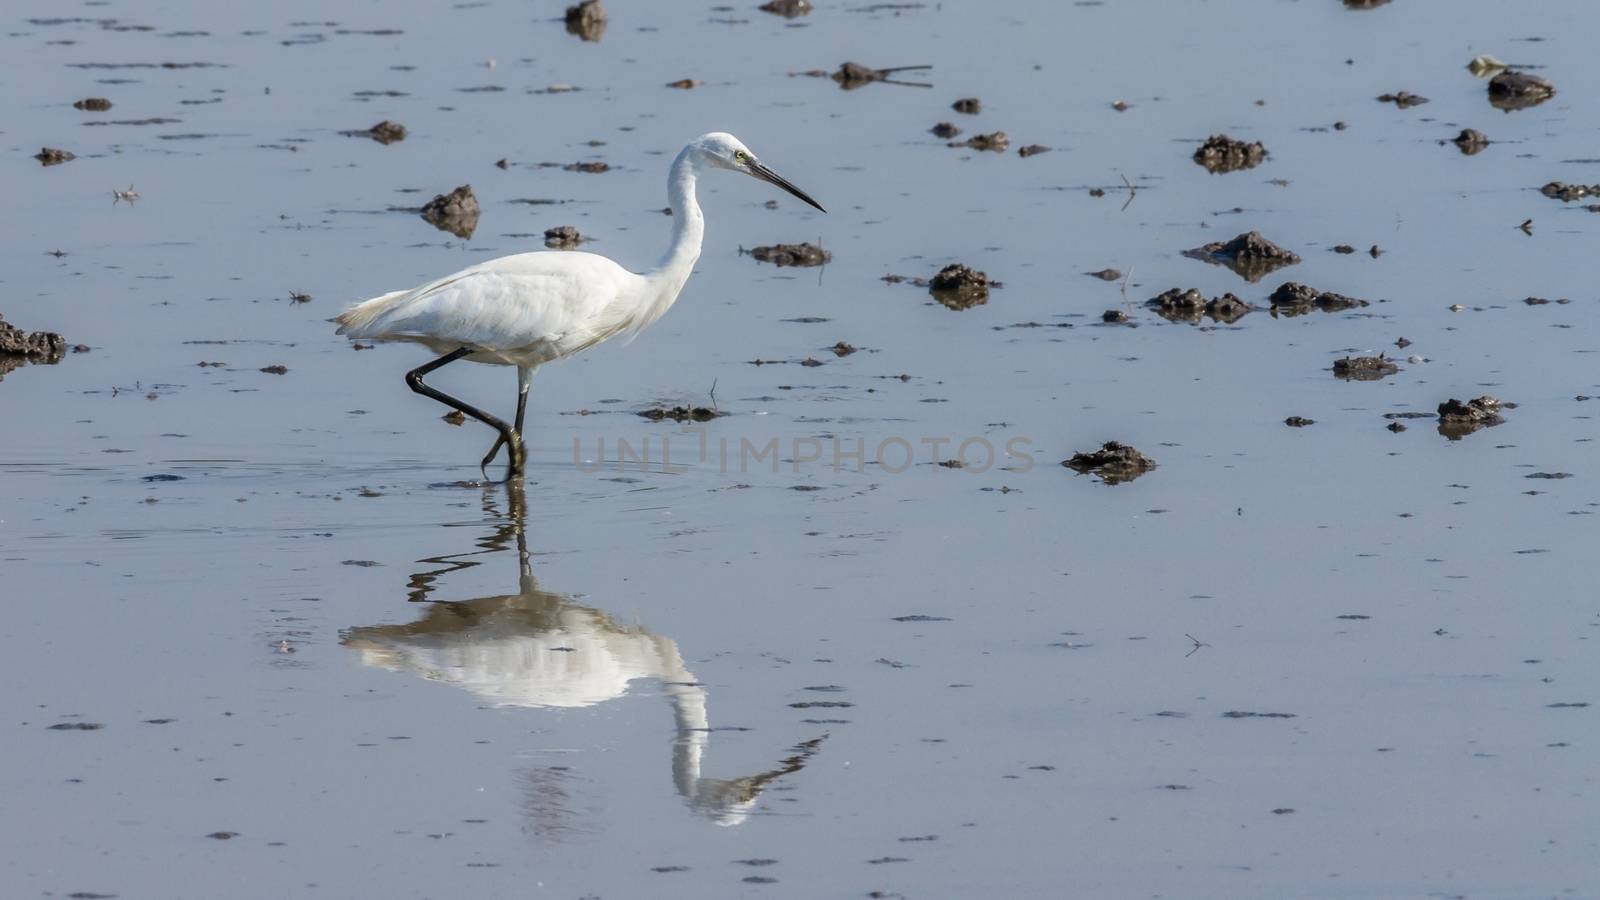 Little egret bird looking for food by Digoarpi